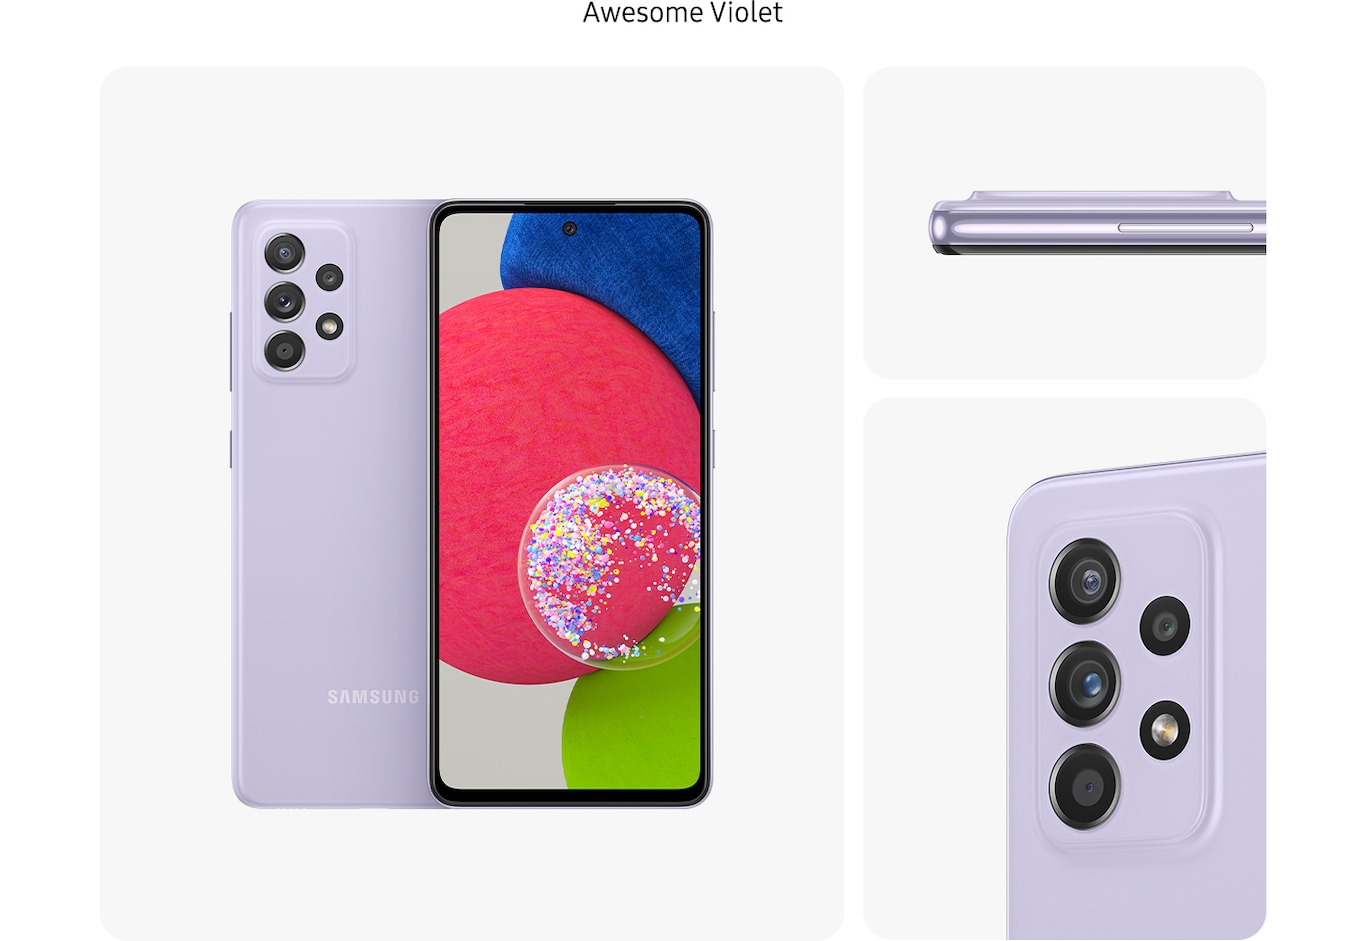 1. Violet
Galaxy A52s 5G in Awesome Violet, seen from multiple angles to show the design: rear, front, side and close-up on the rear camera.